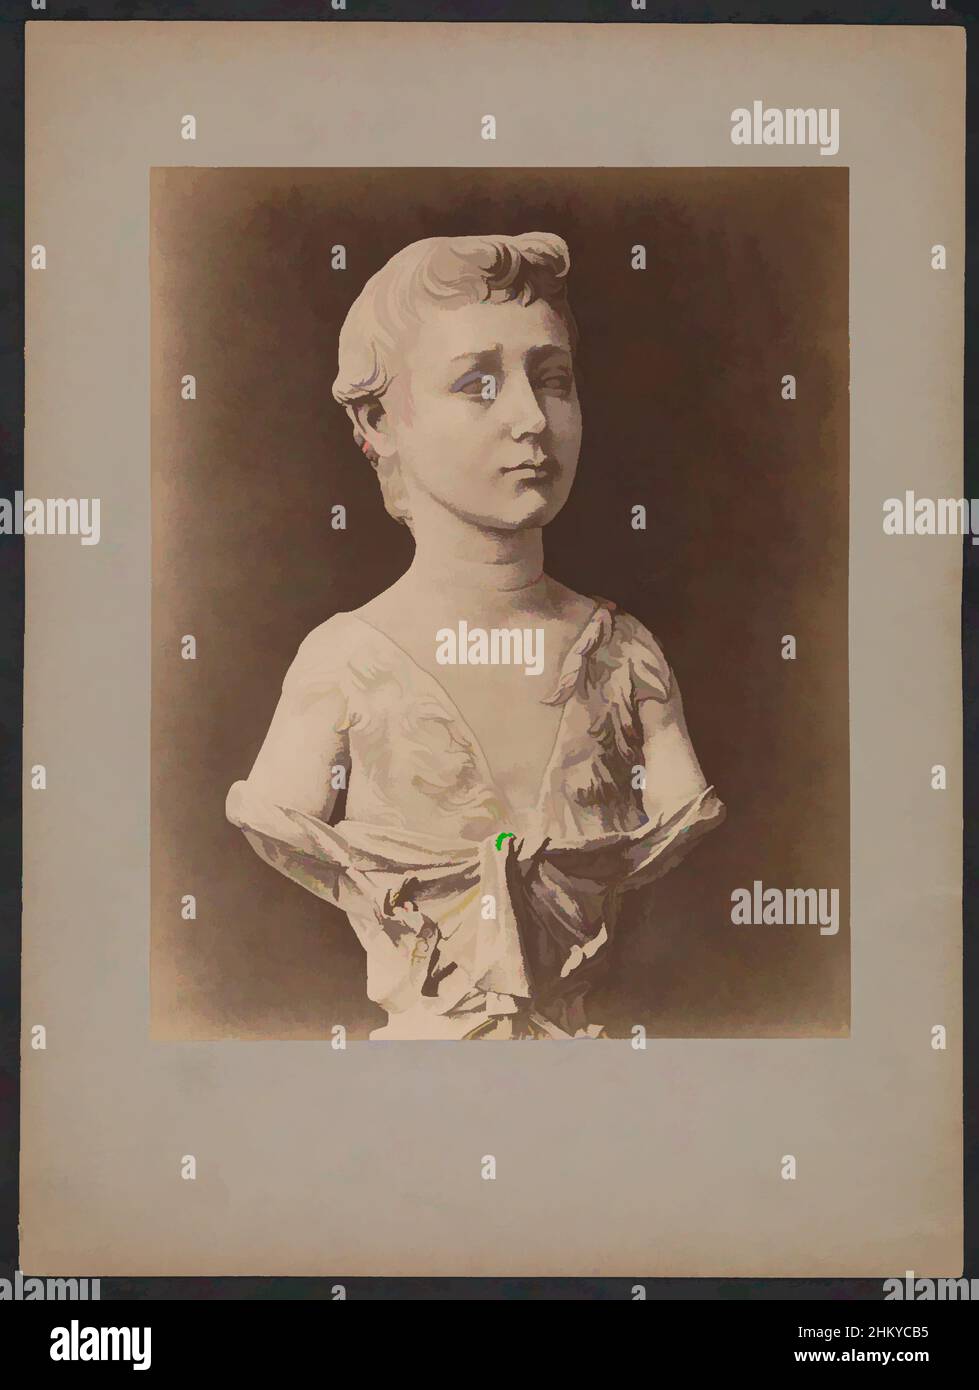 Art inspired by Bust of an unknown person, Alinari, 1850 - 1900, cardboard, albumen print, height 345 mm × width 259 mm, Classic works modernized by Artotop with a splash of modernity. Shapes, color and value, eye-catching visual impact on art. Emotions through freedom of artworks in a contemporary way. A timeless message pursuing a wildly creative new direction. Artists turning to the digital medium and creating the Artotop NFT Stock Photo